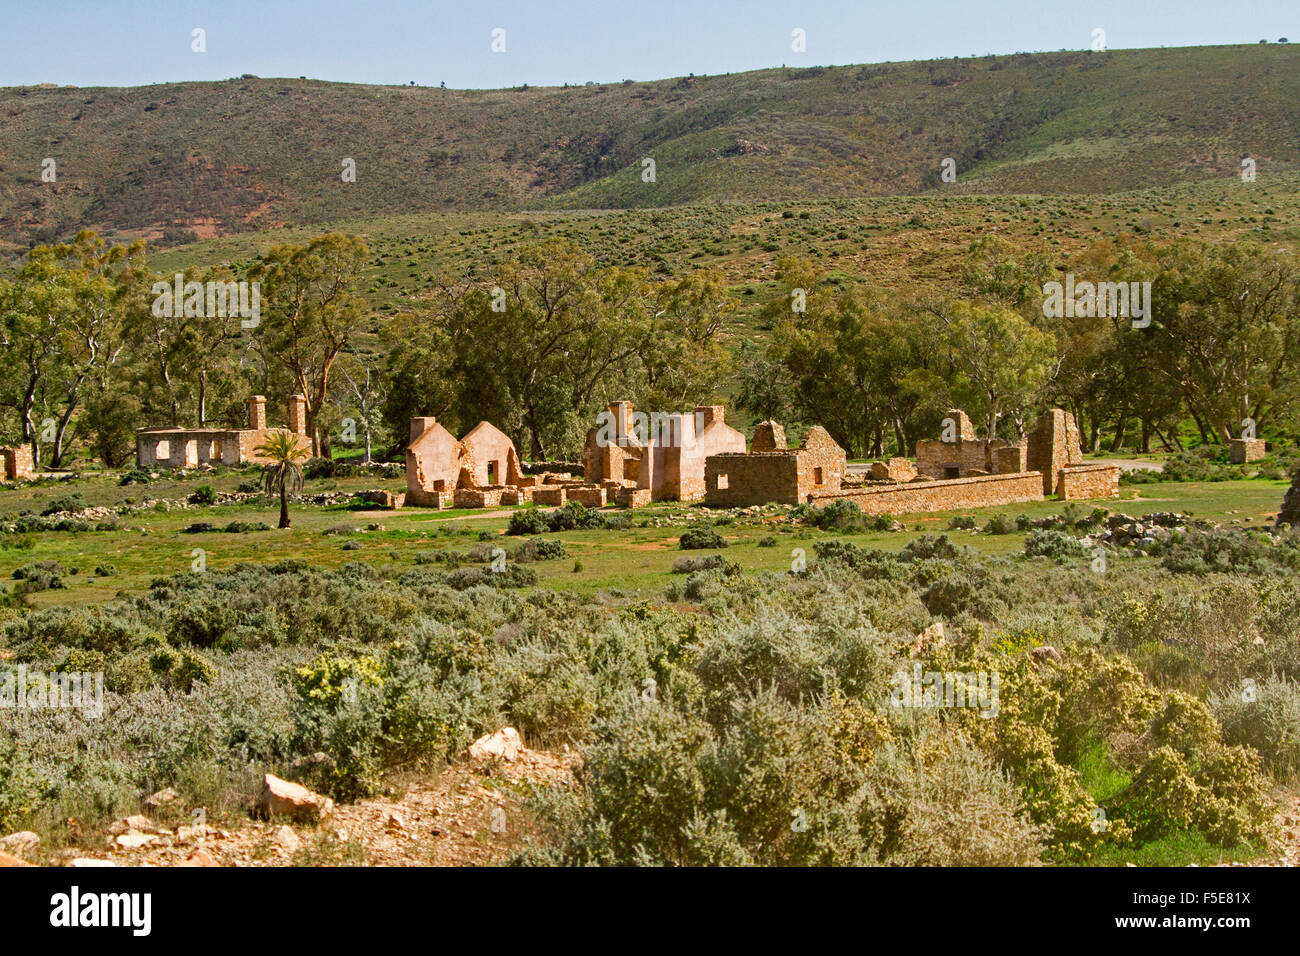 Landscape with historic stone buildings at ruins of Kanyaka homestead at foot of hill north of Quorn, in outback South Australia Stock Photo